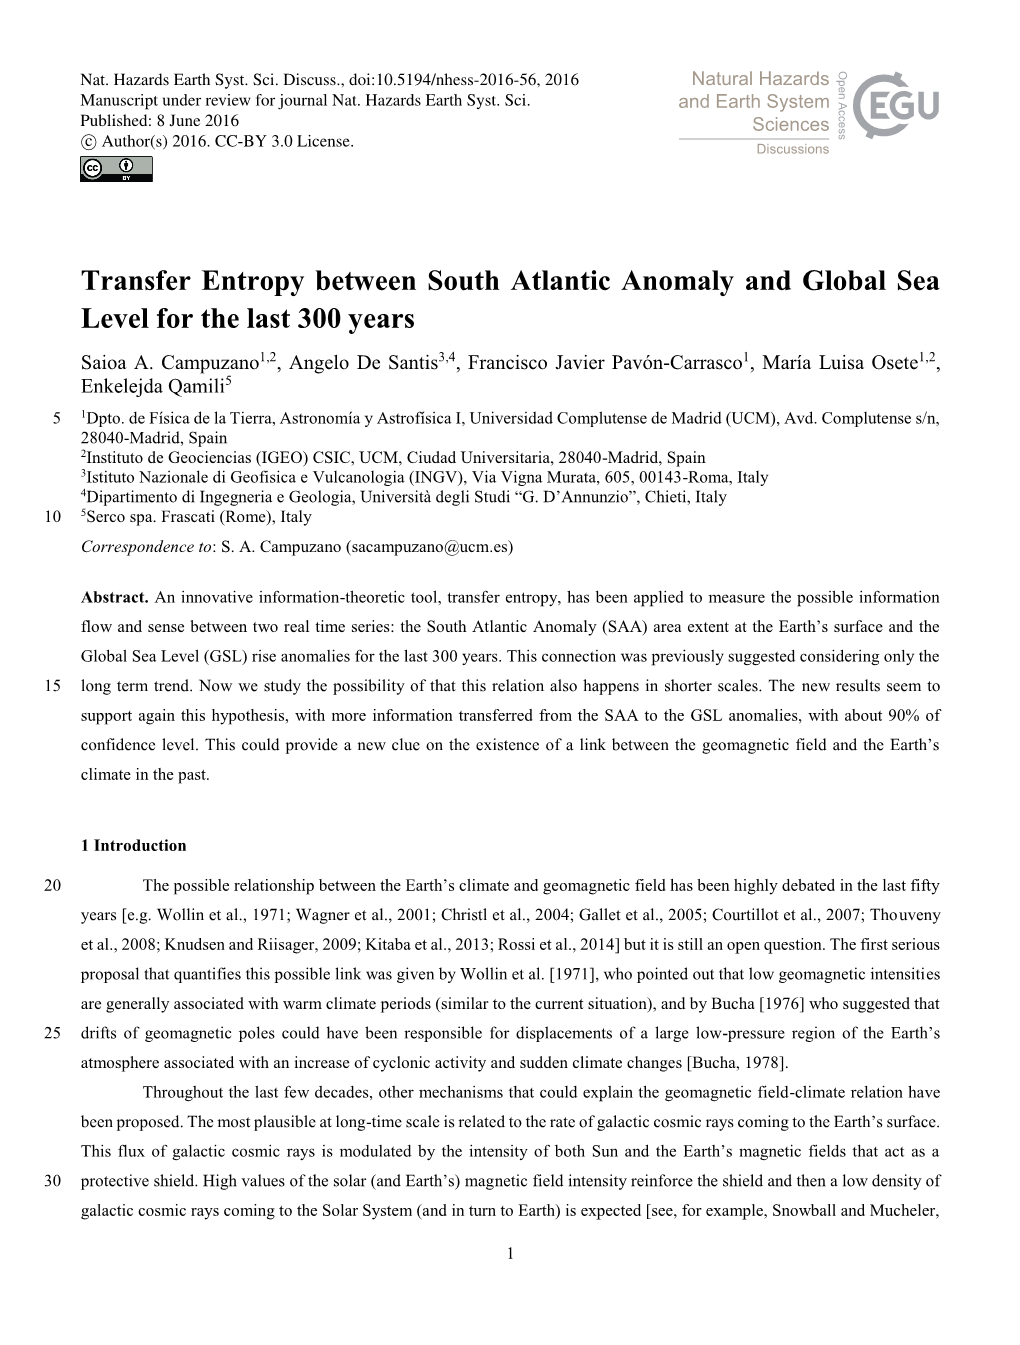 Transfer Entropy Between South Atlantic Anomaly and Global Sea Level for the Last 300 Years Saioa A